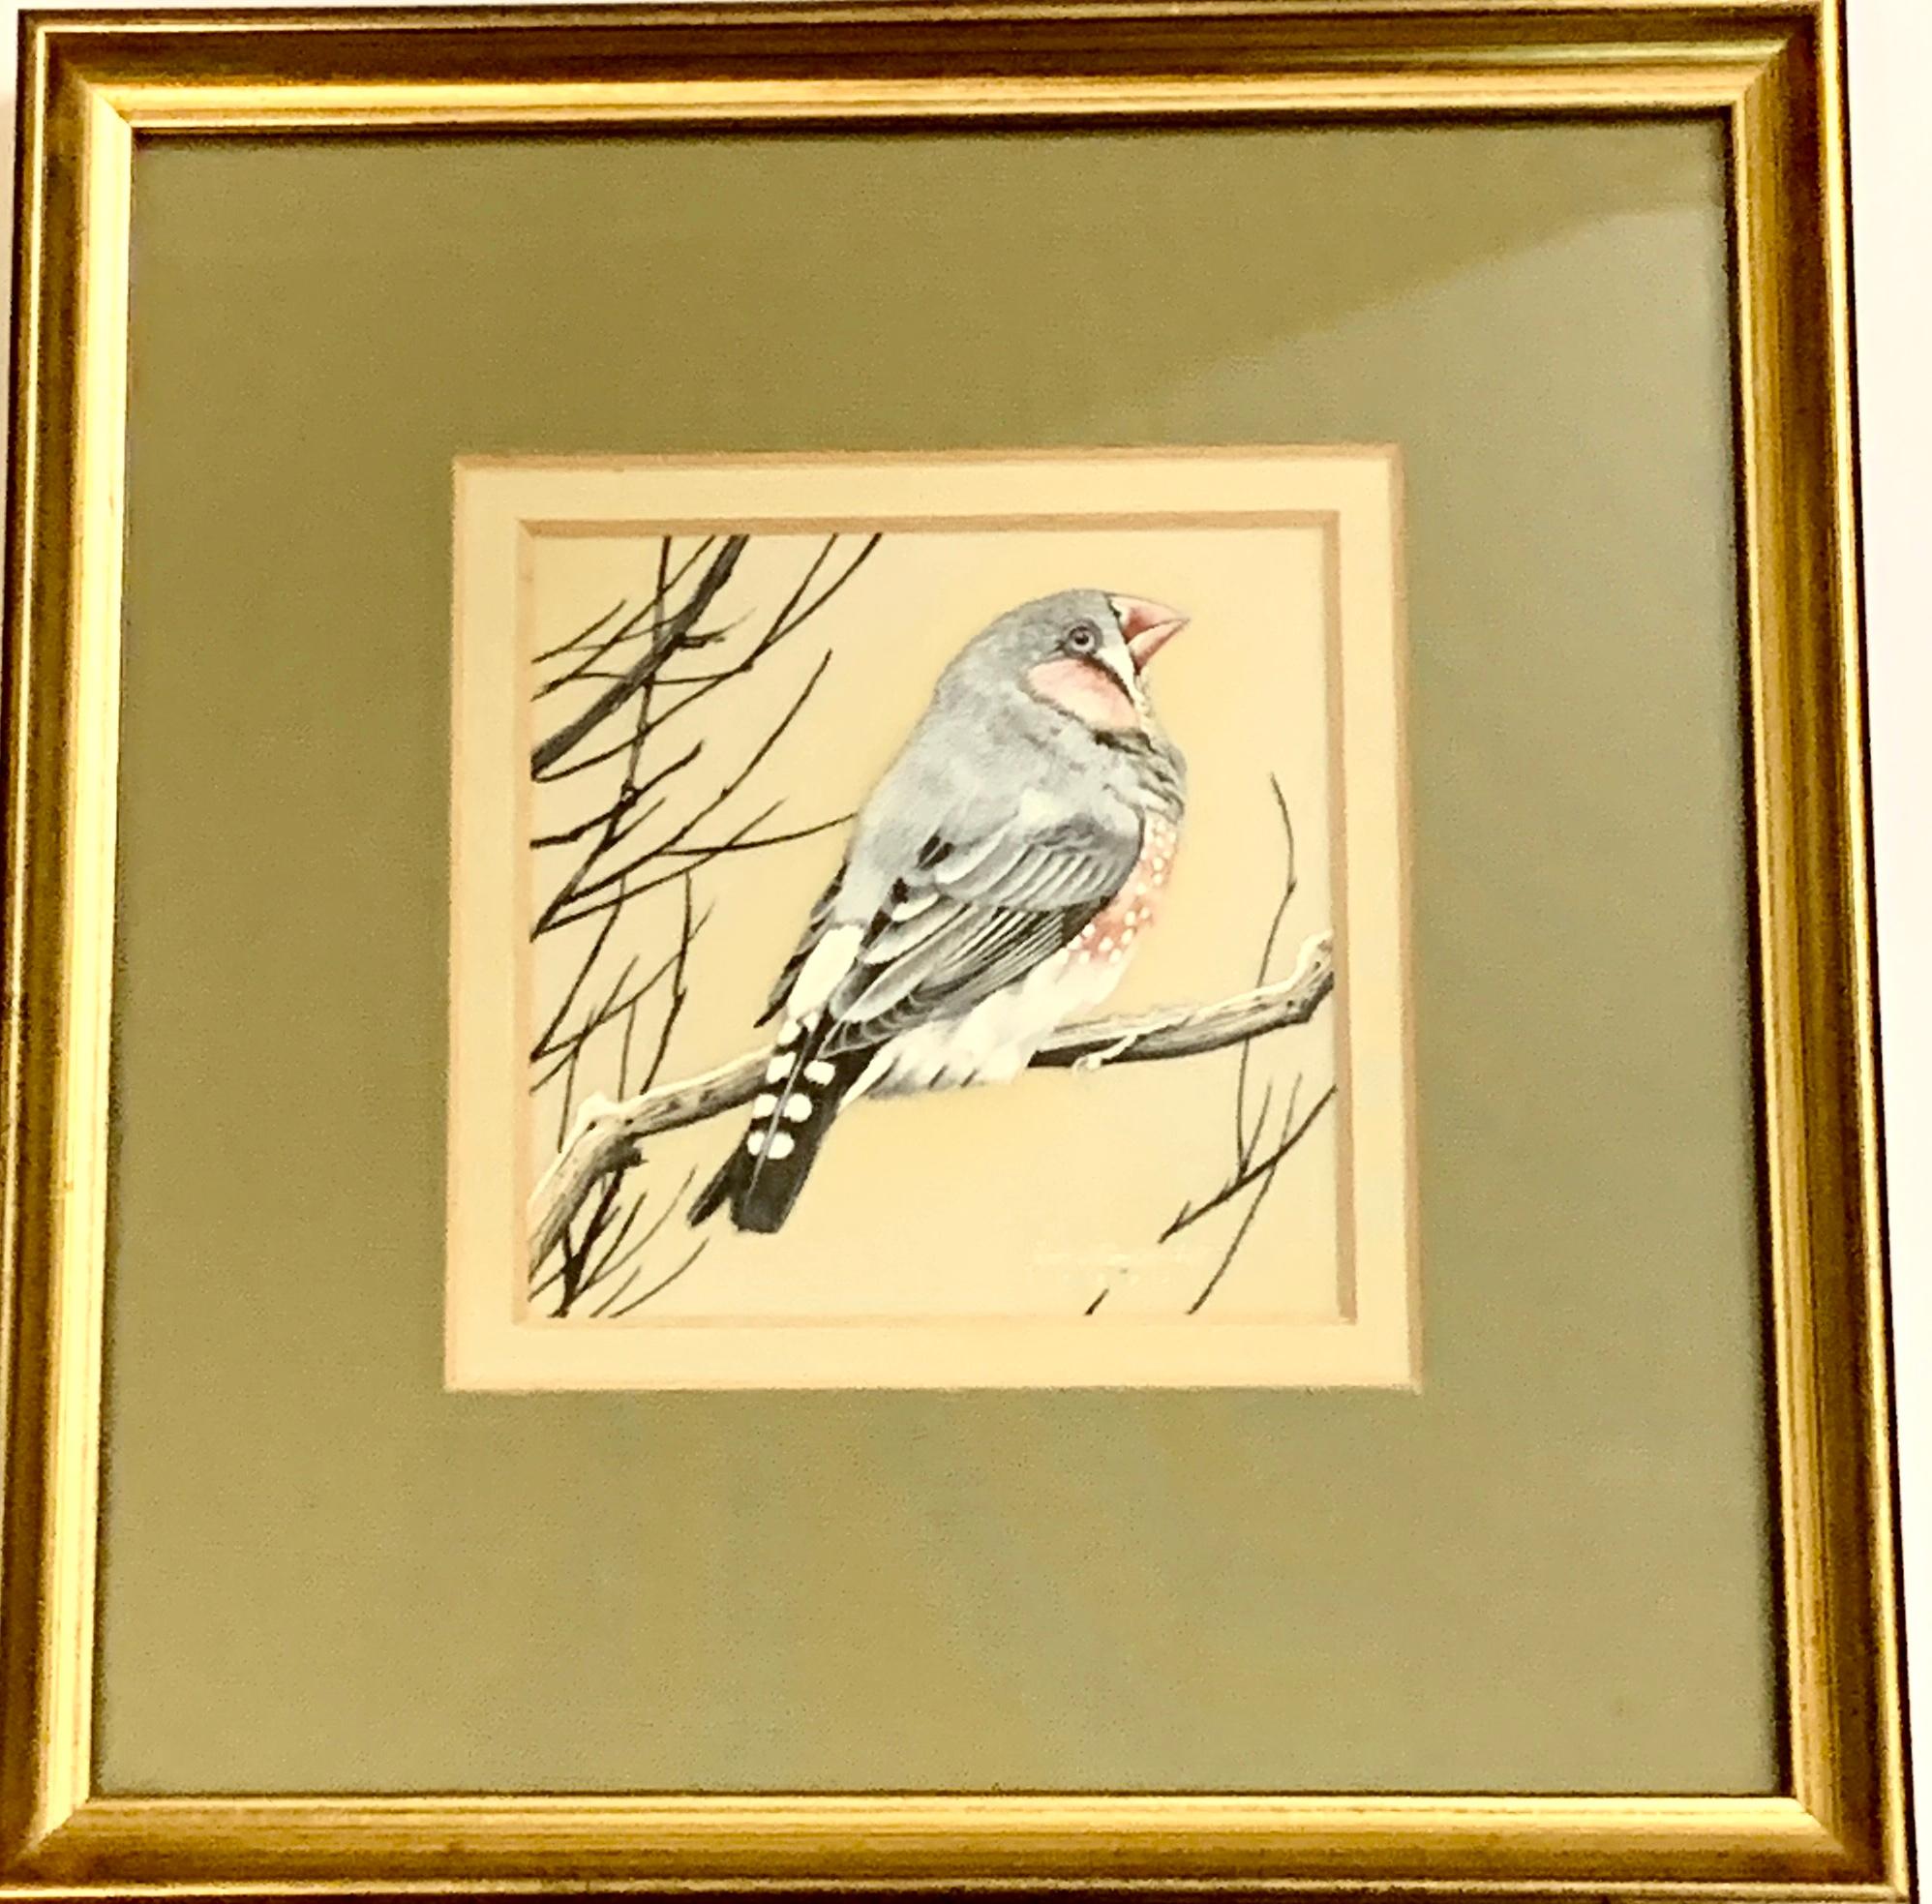 James Williamson-Bell Animal Art - English 20th century study of a Finch bird seated on a snow covered branch